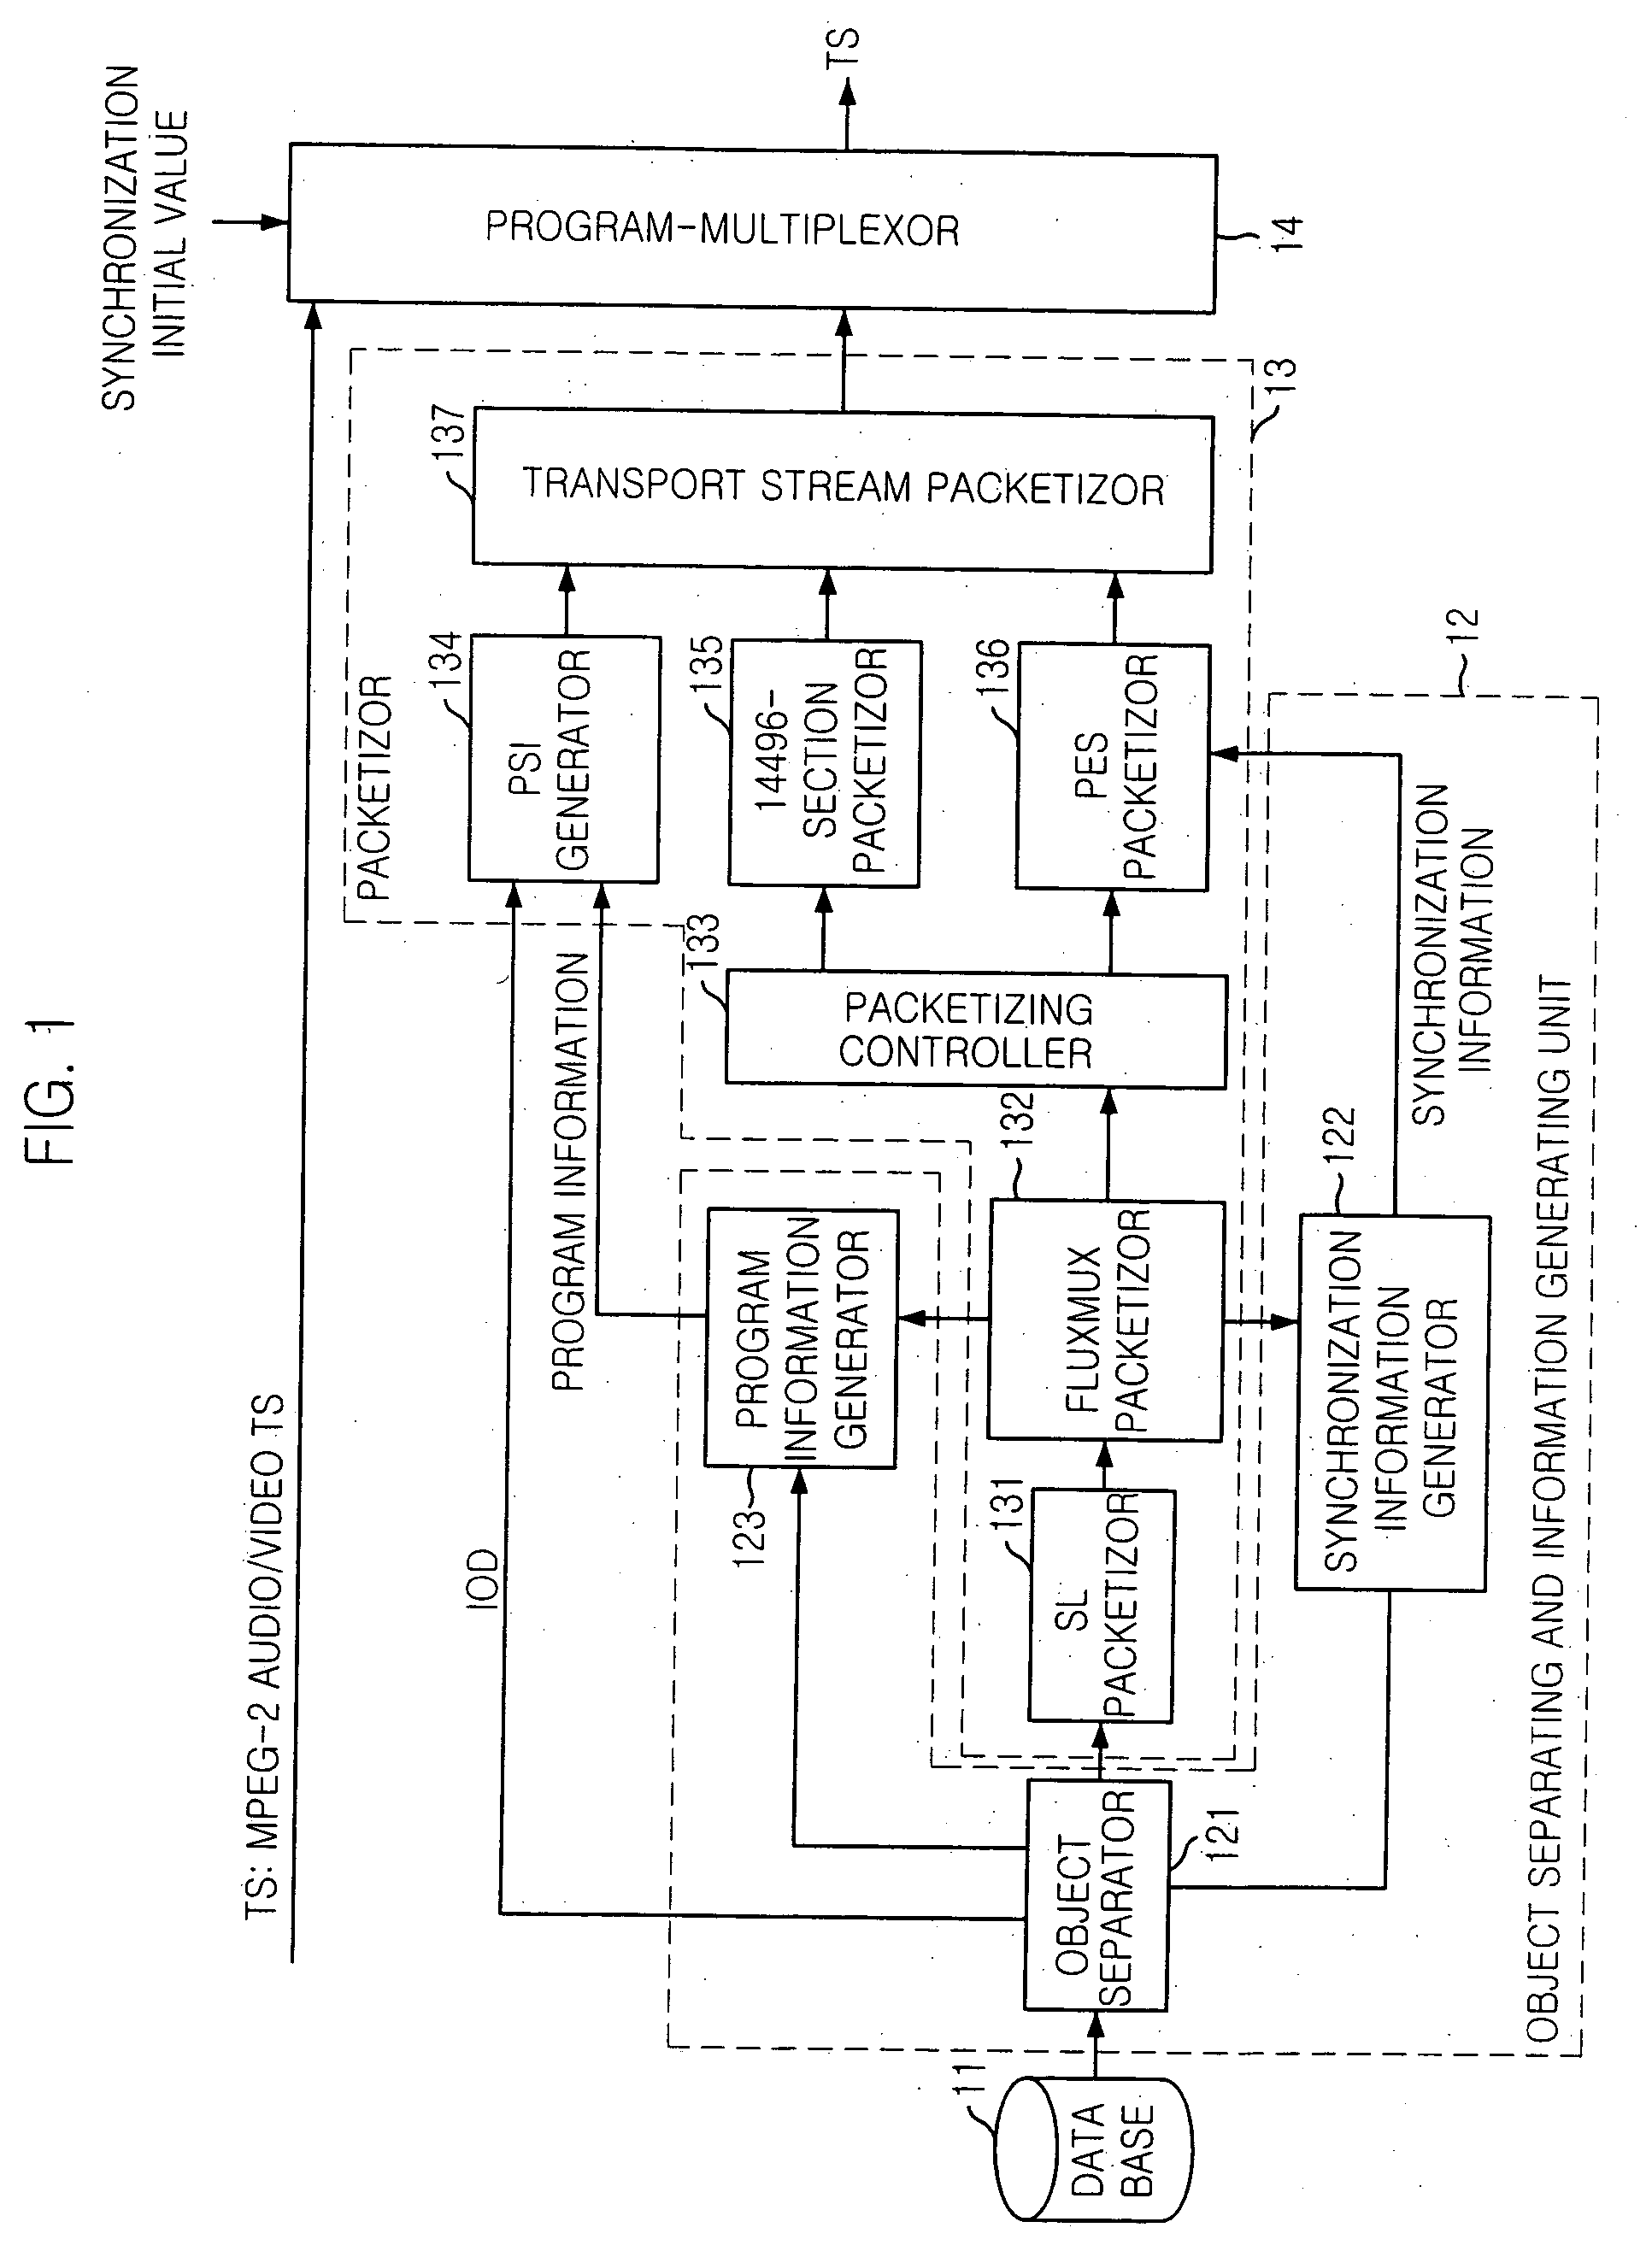 Apparatus and method for transmitting mpeg-4 data synchronized with mpeg-2 data